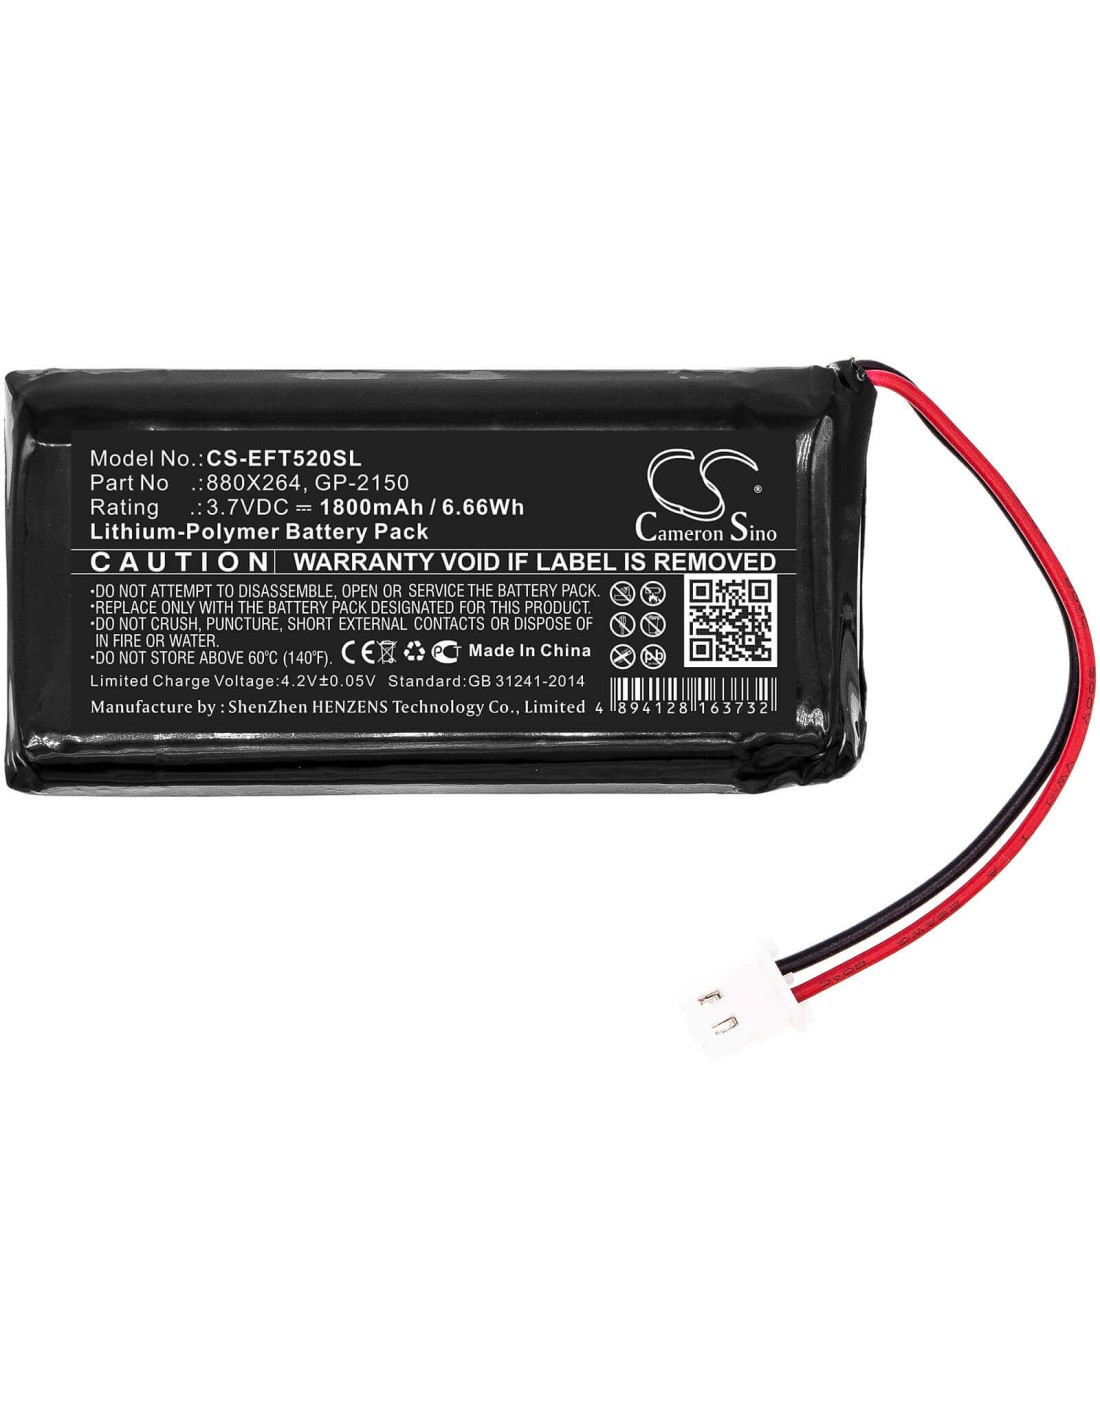 Battery for Exfo, Fot-5200 3.7V, 1800mAh - 6.66Wh